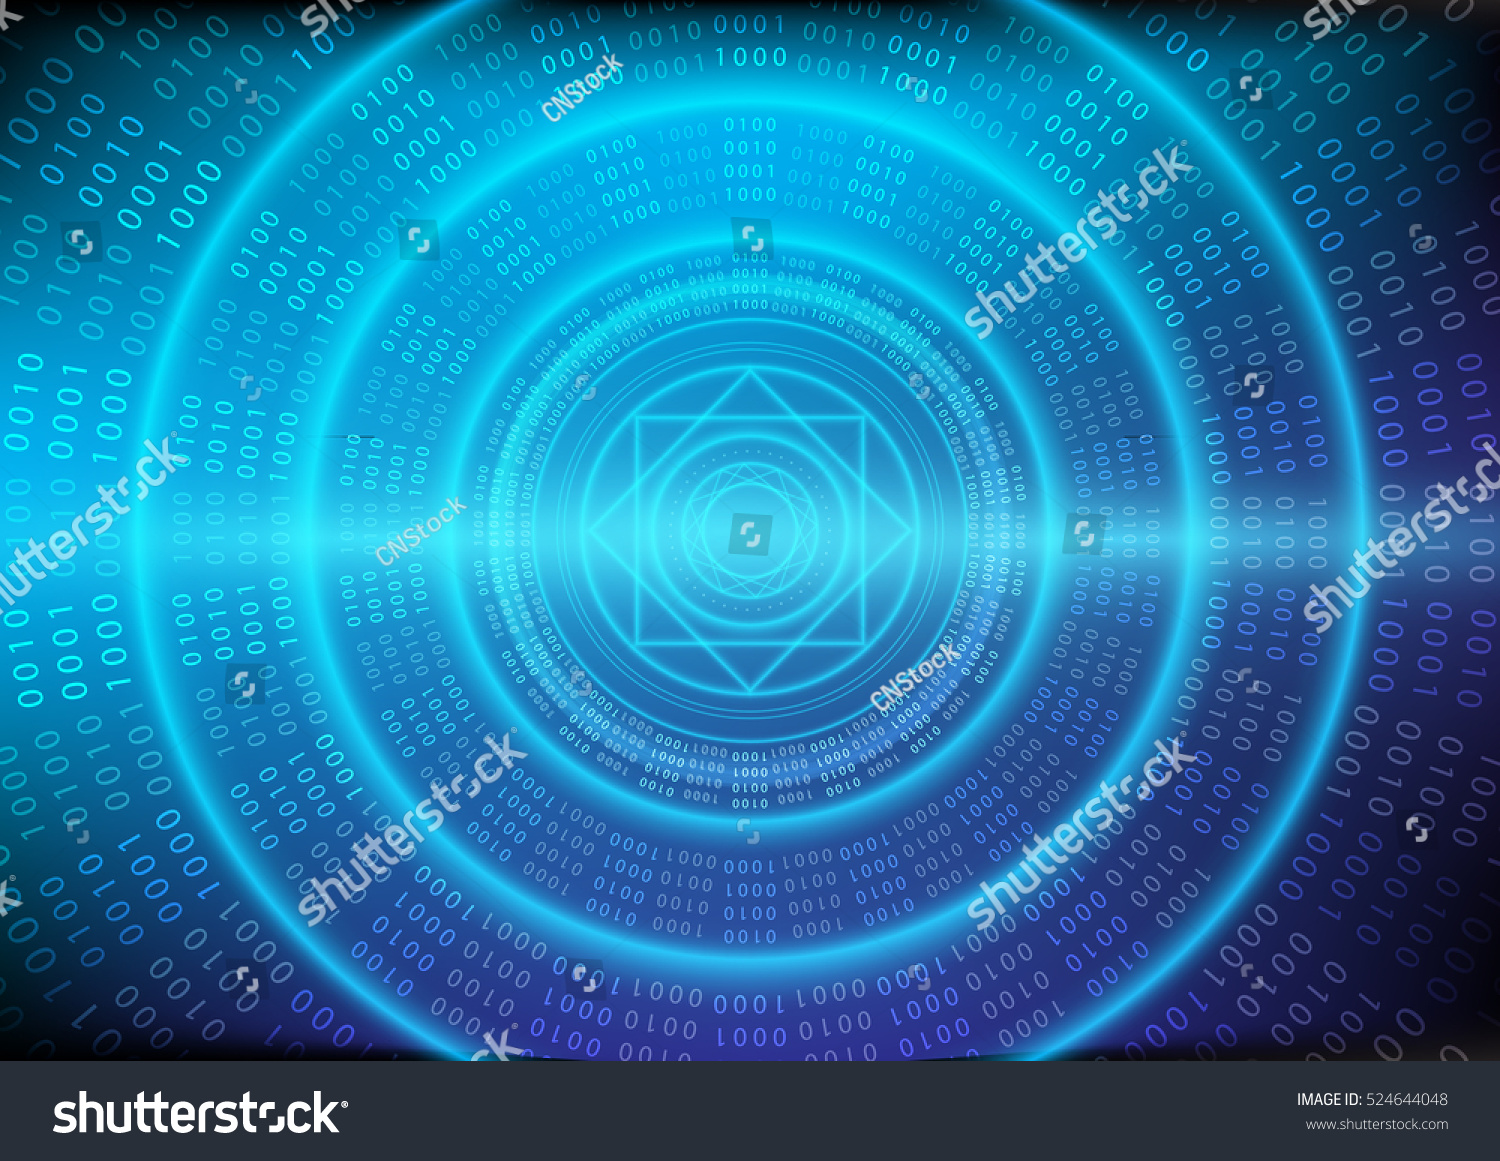 SVG of Abstract information and the future of technology. The combination of Mandalas design with the binary code. svg